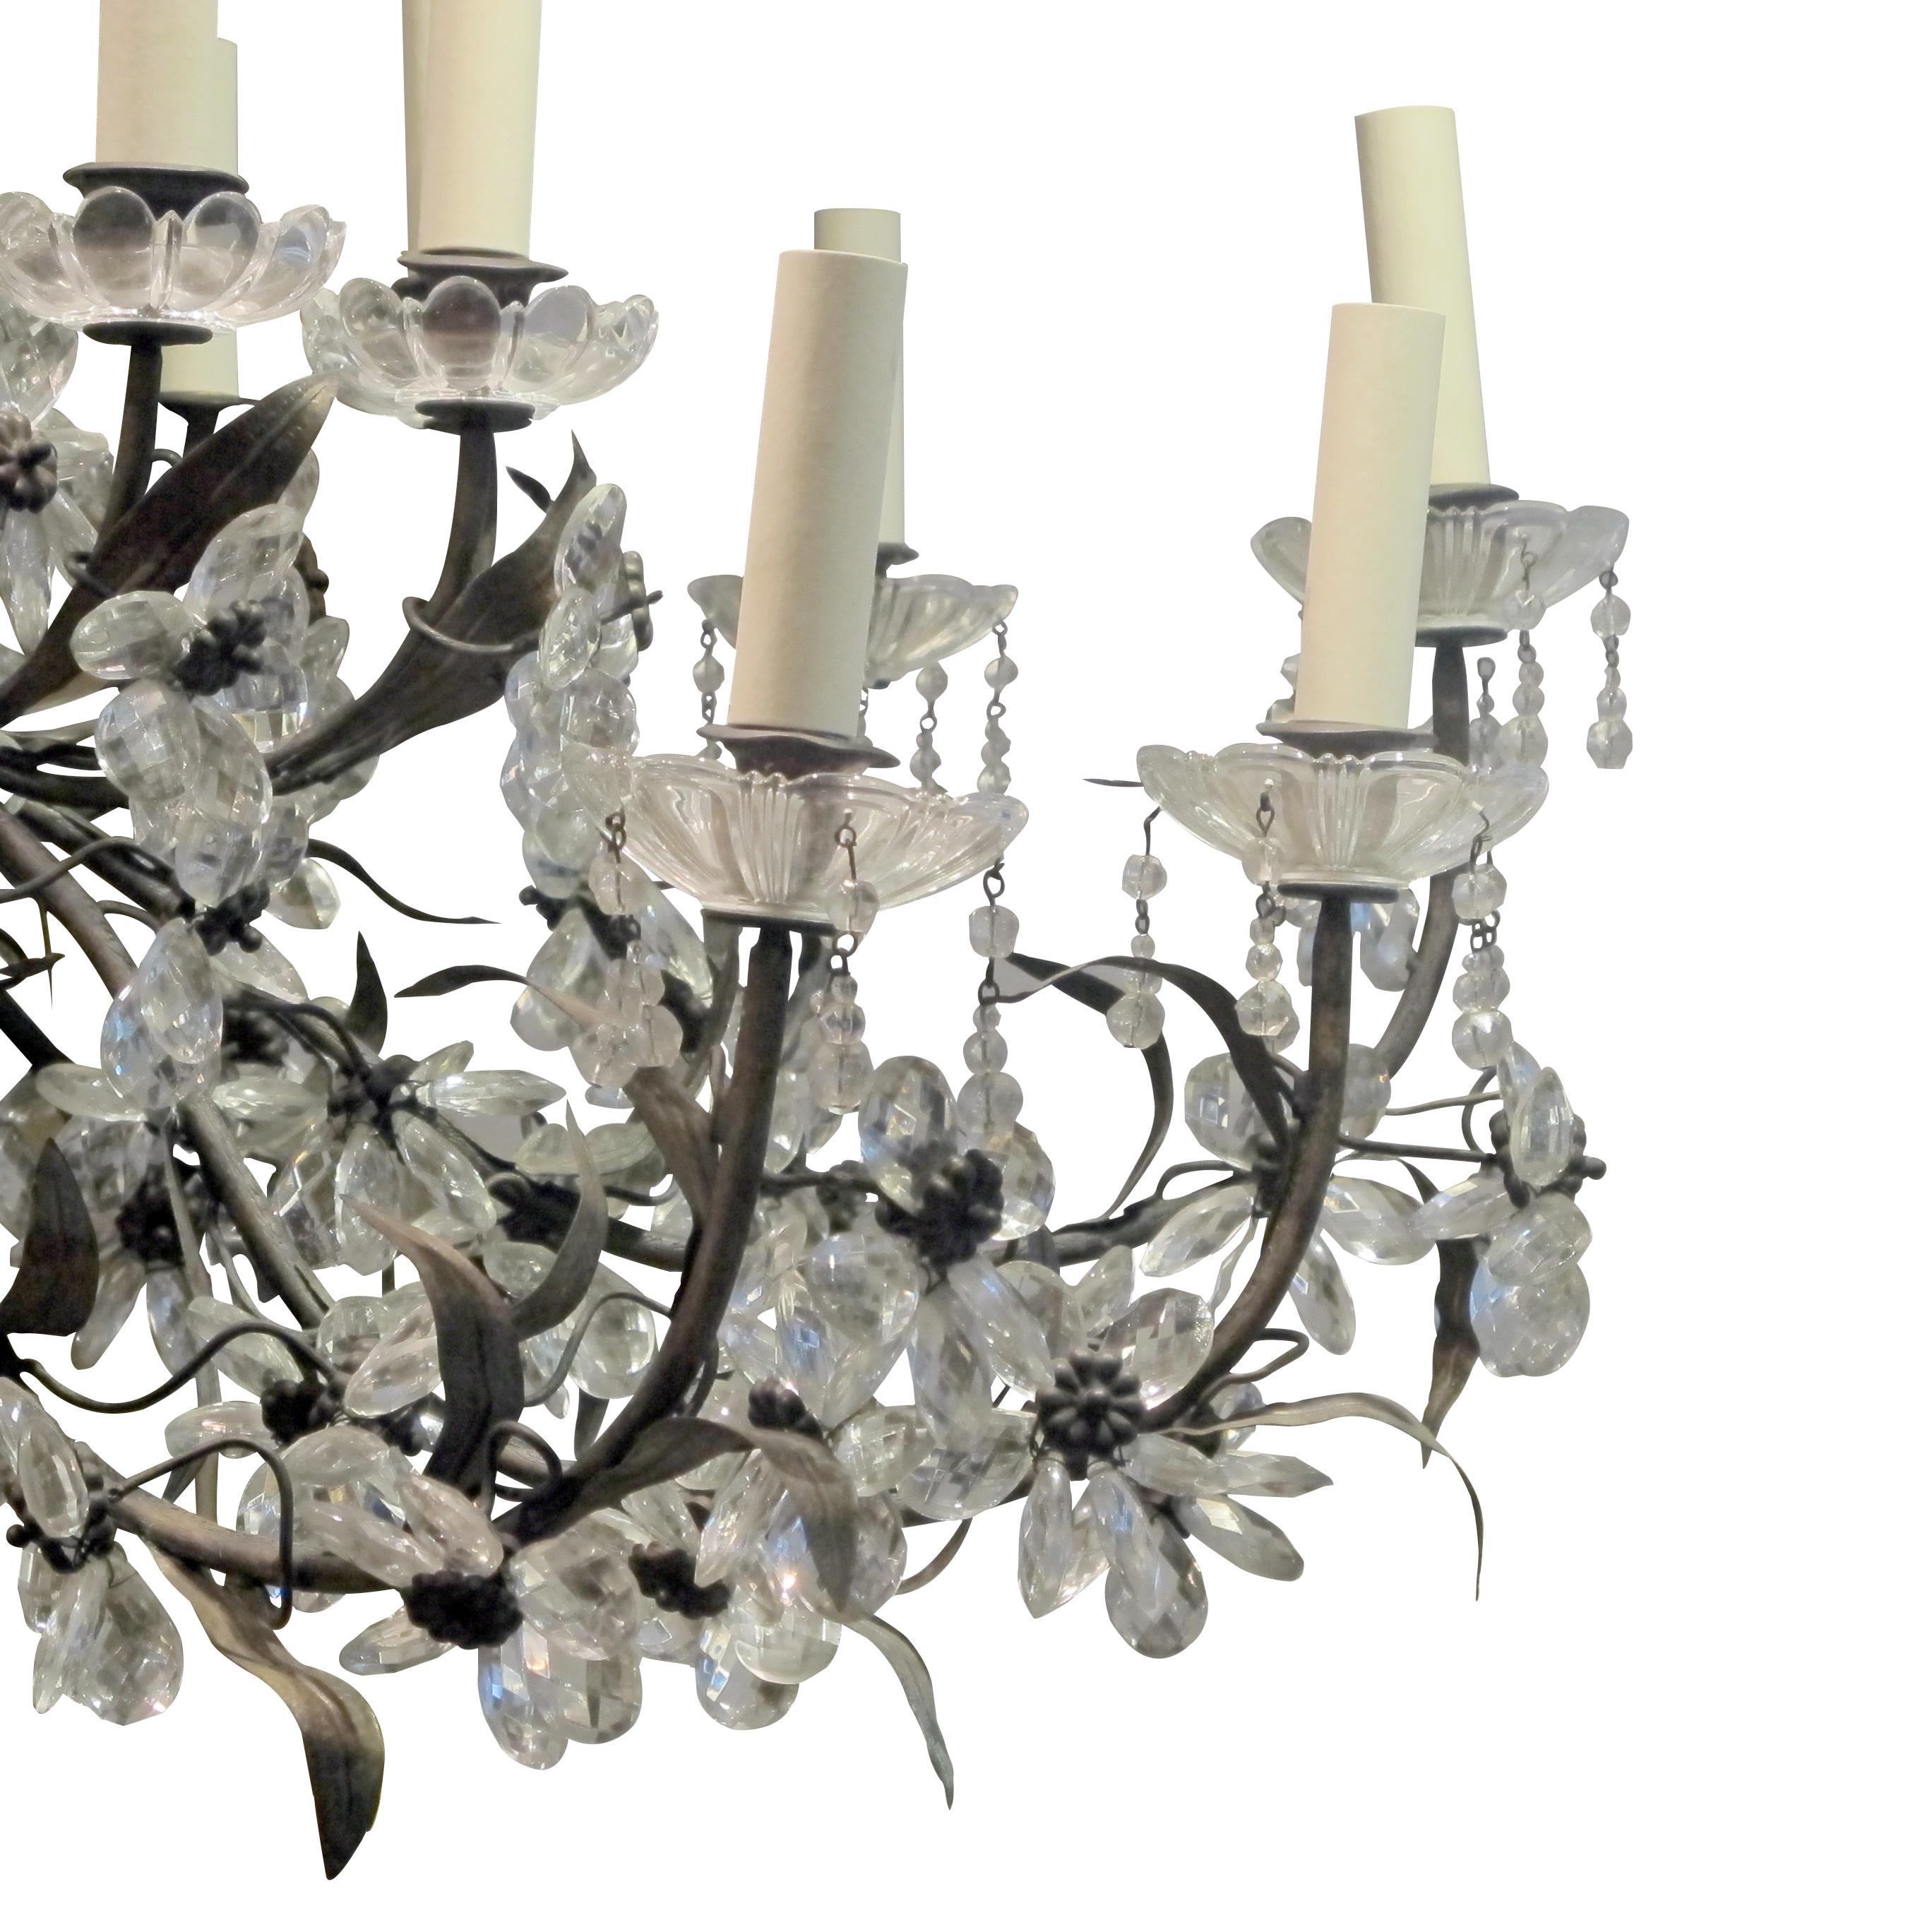 This is a magnificent large leafy chandelier meticulously crafted with a profusion of crystal flowers on a brass and toleware frame. This 1940s French chandelier is a real statement piece with 24 branches. The chandelier has been rewired to the UK